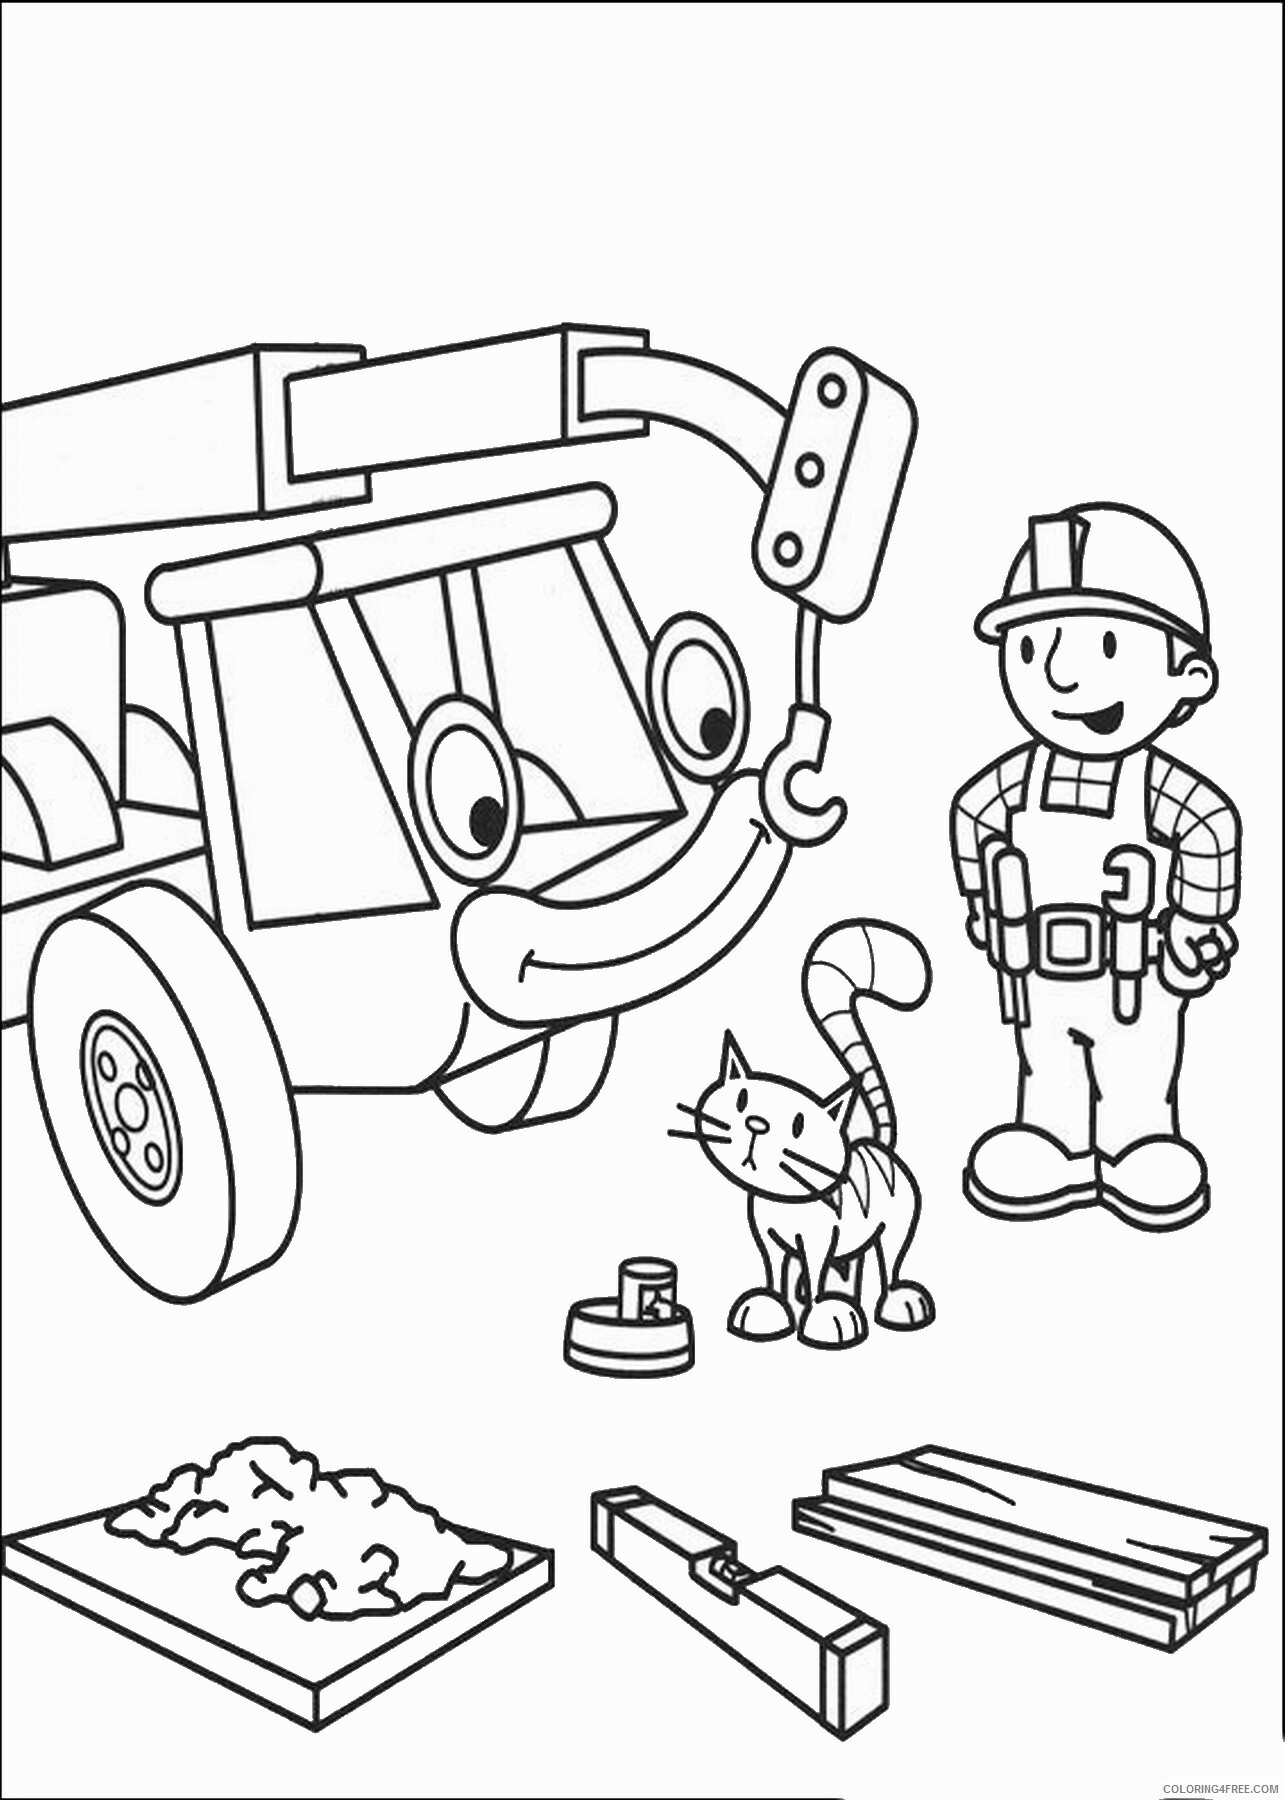 Bob the Builder Coloring Pages TV Film bob the builder_02 Printable 2020 00952 Coloring4free